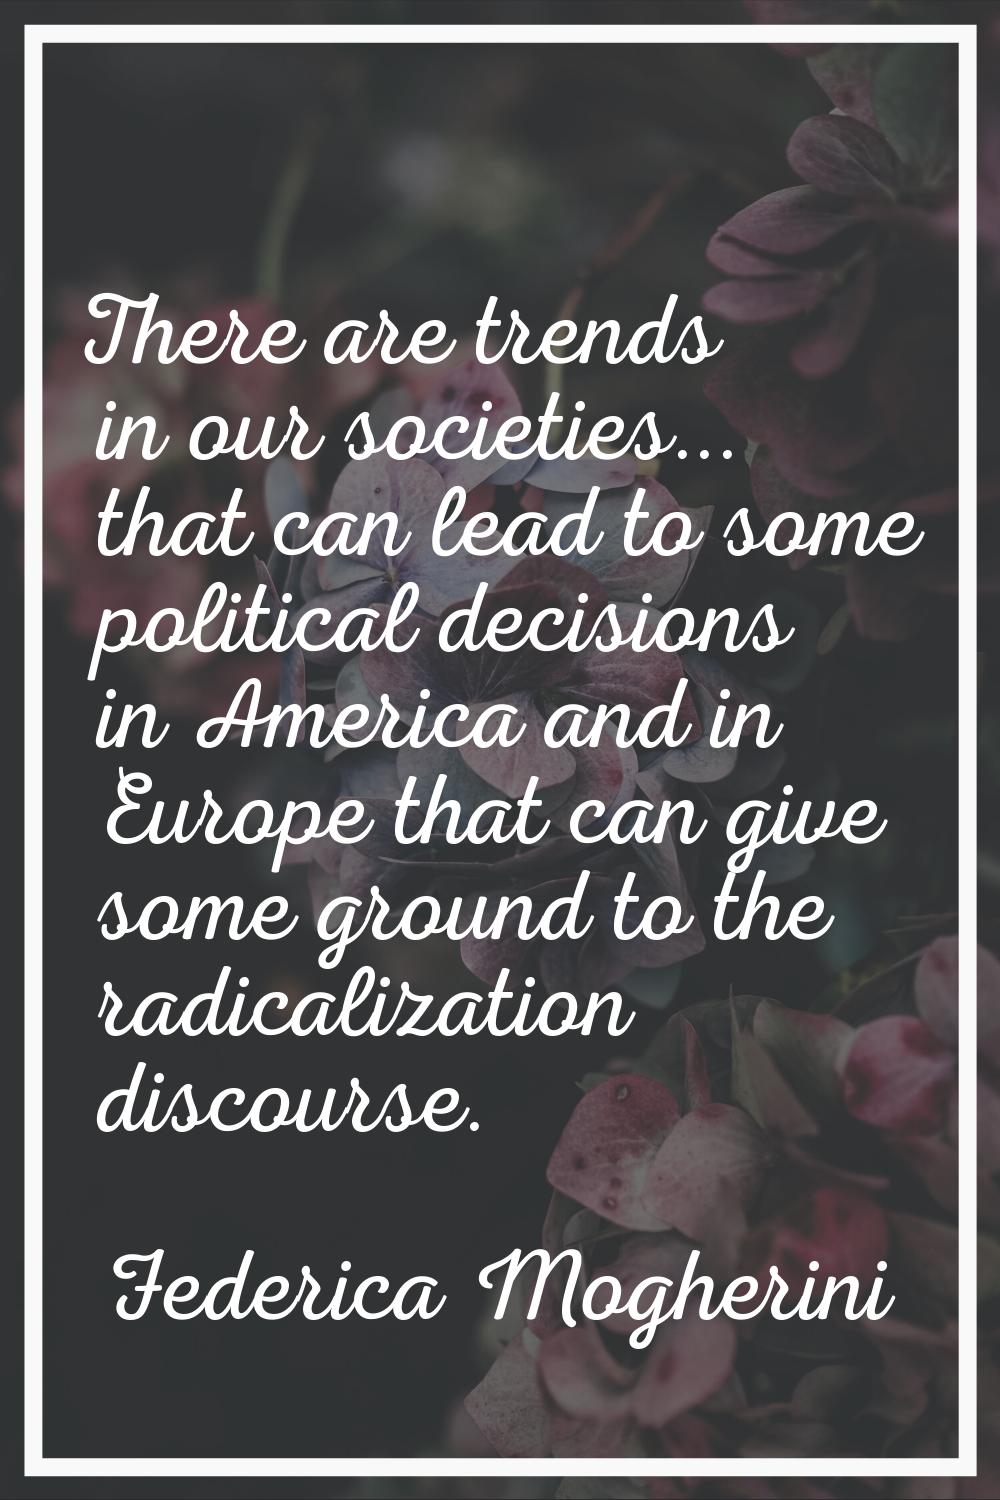 There are trends in our societies... that can lead to some political decisions in America and in Eu